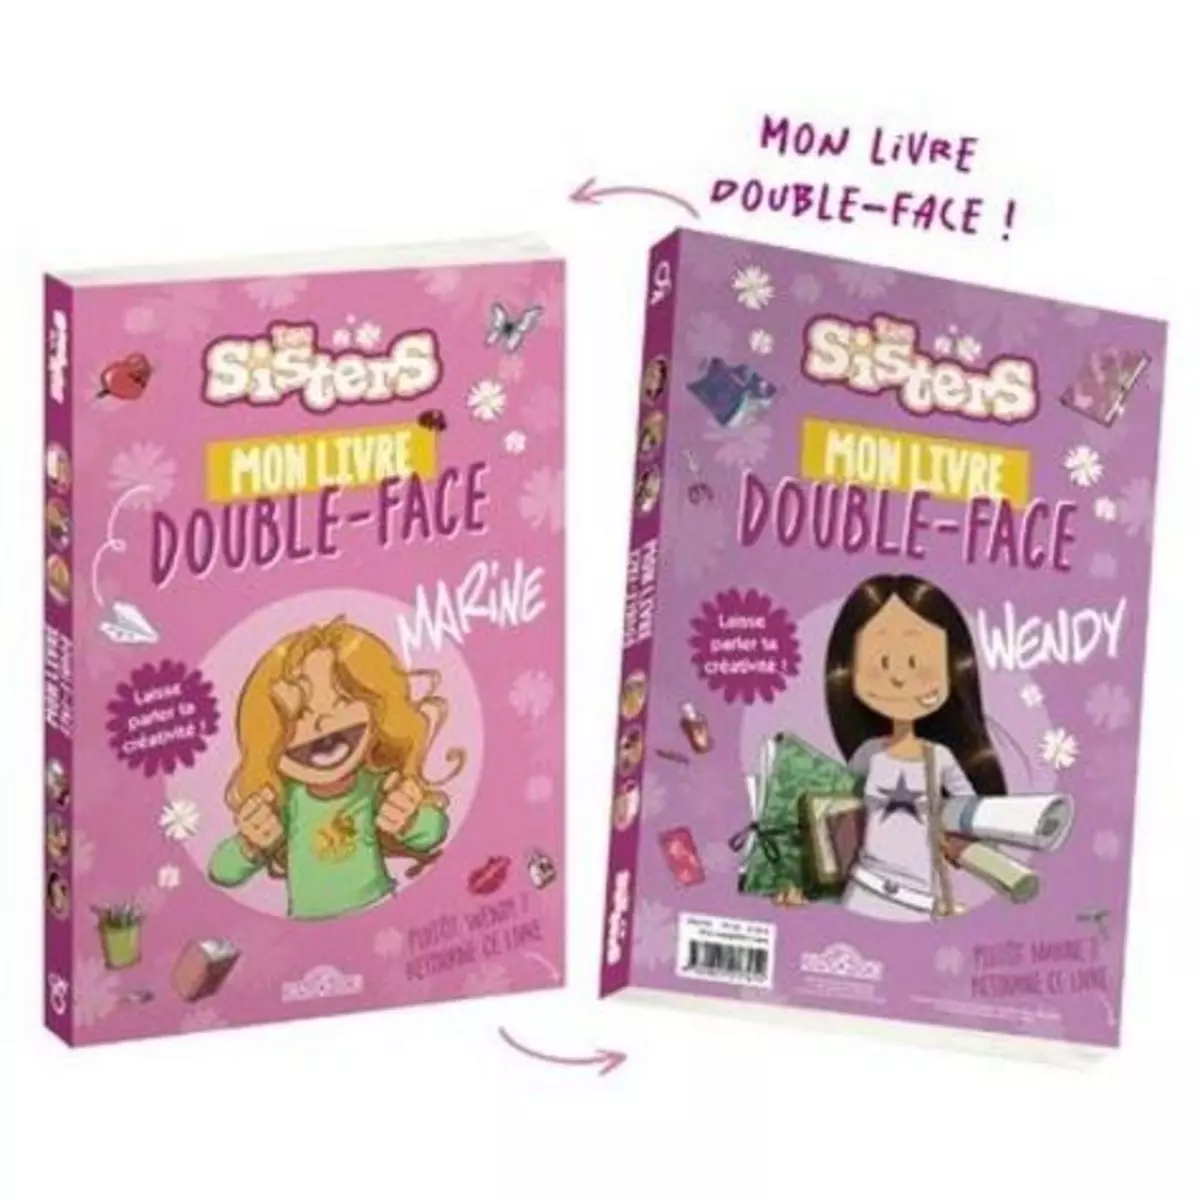  MON LIVRE DOUBLE-FACE LES SISTERS. MARINE - WENDY, Amstramgram